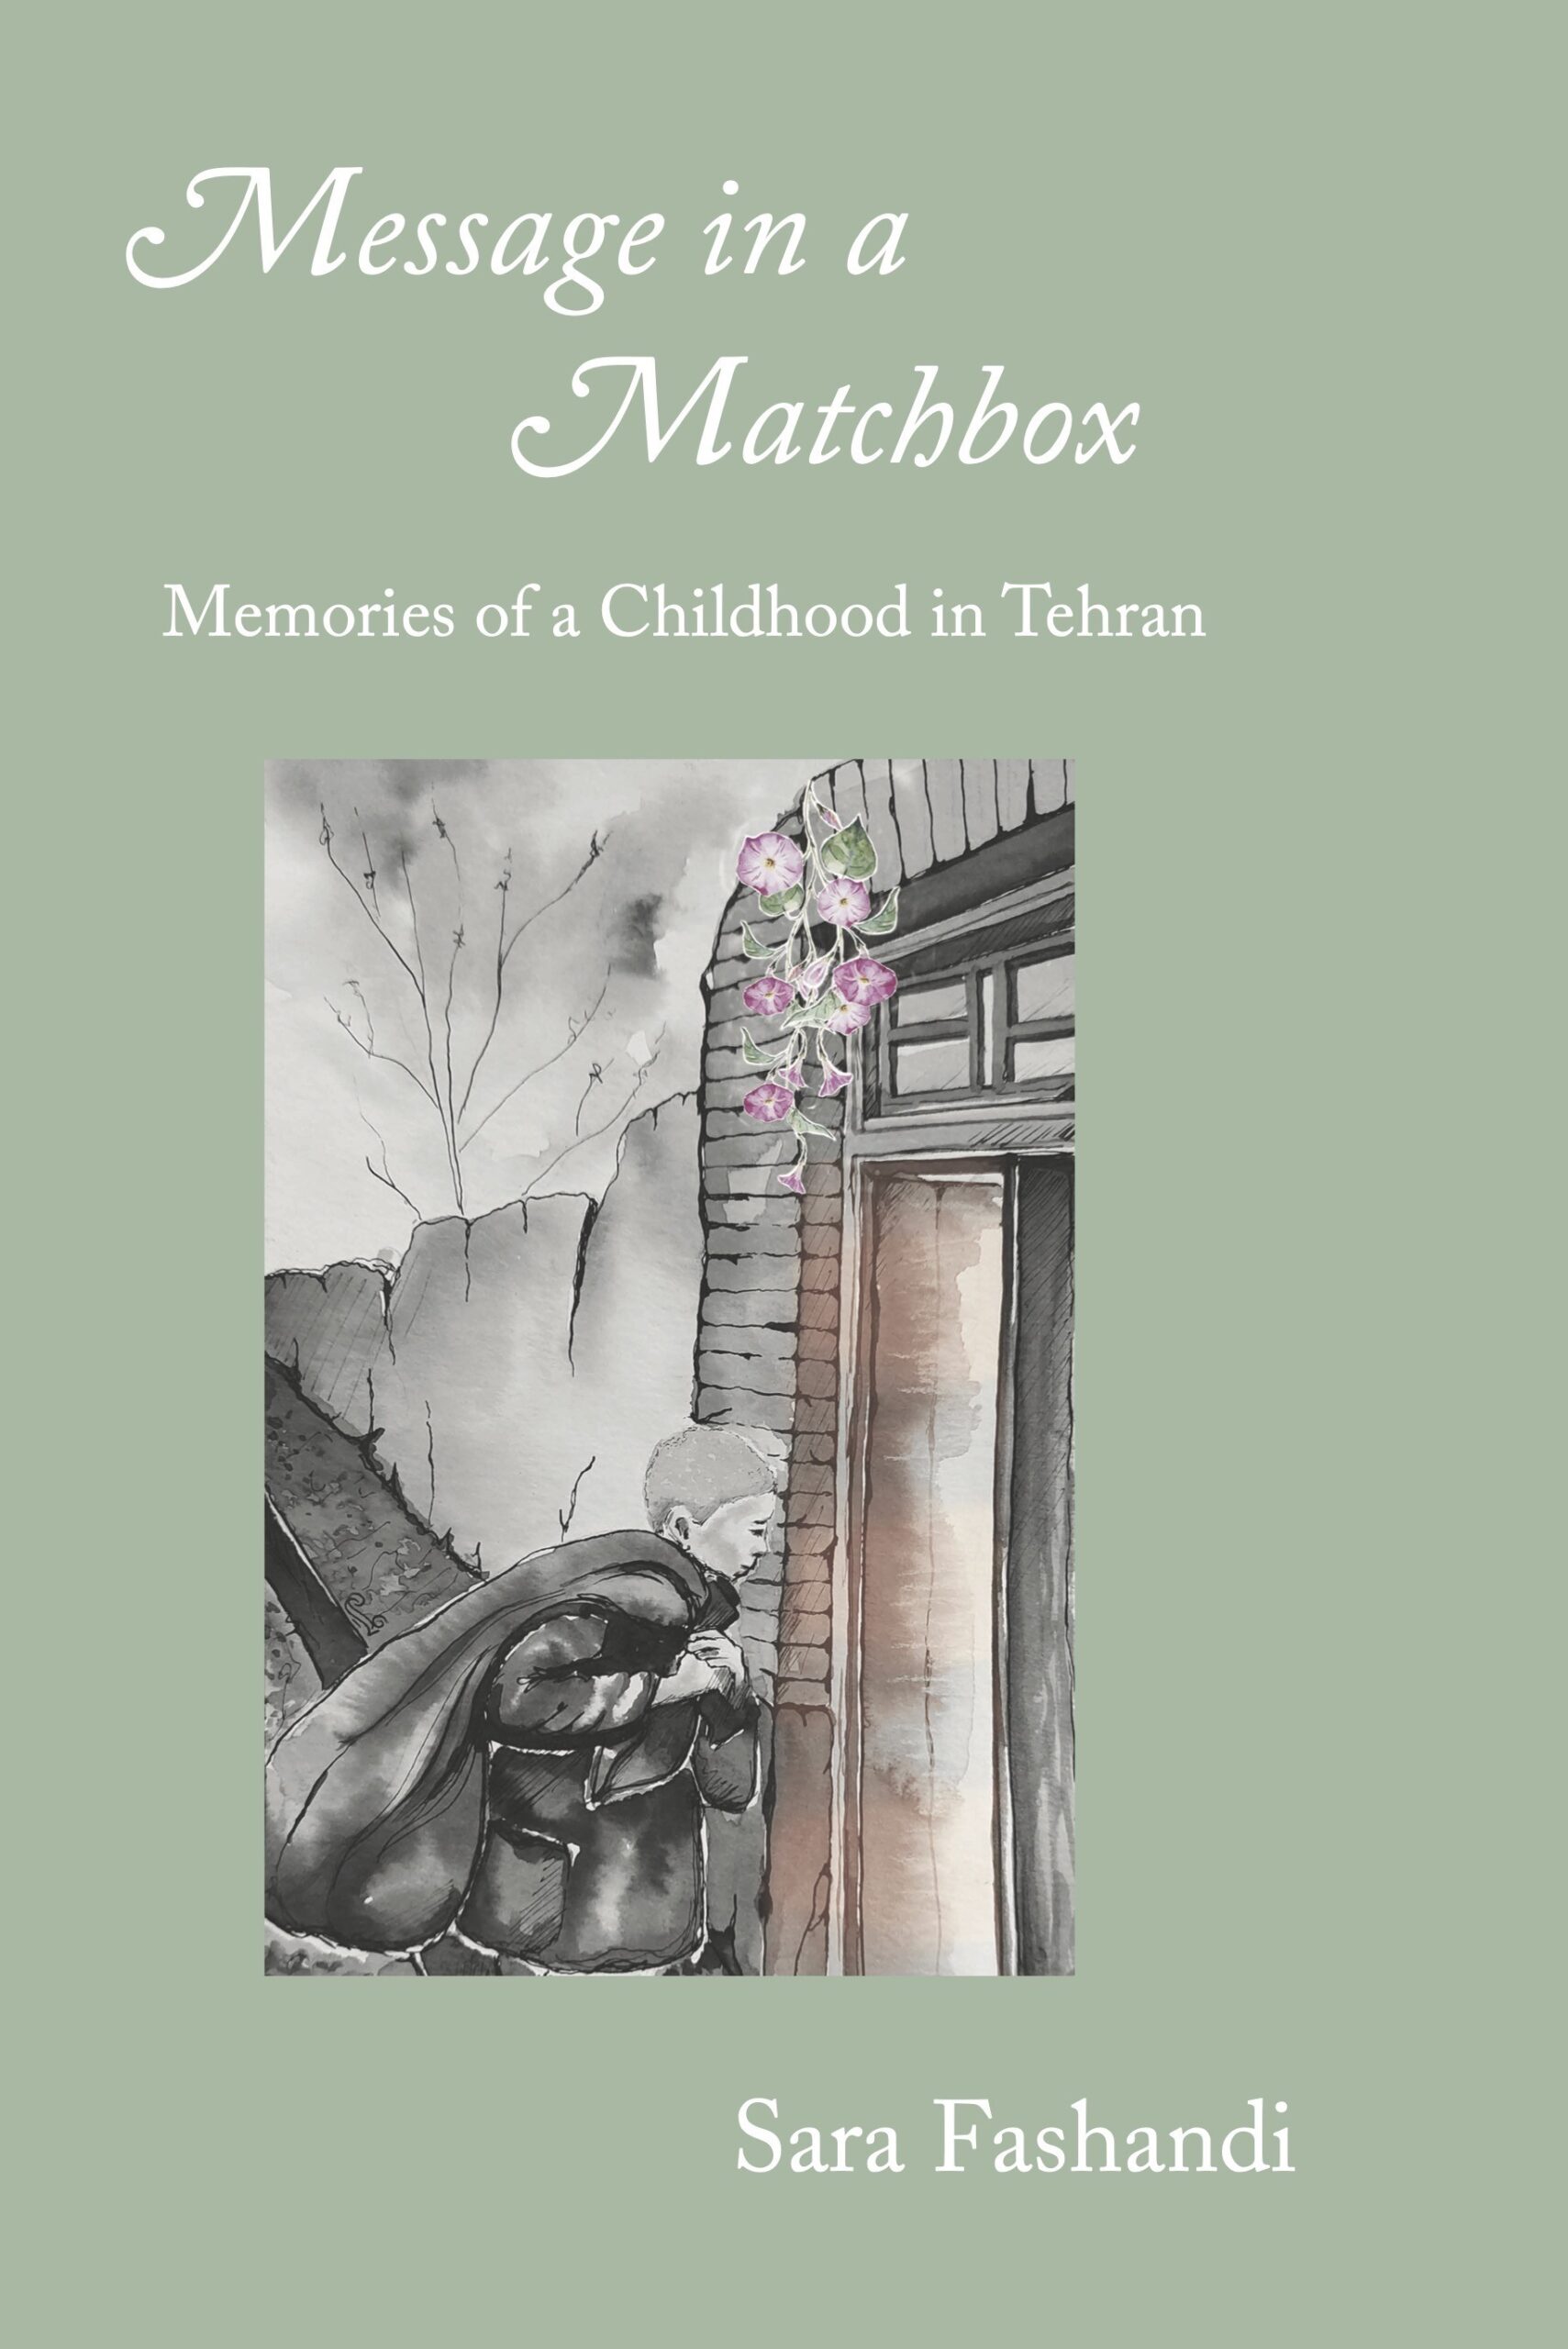 Message in a Matchbox: Memories of a Childhood in Tehran by Sara Fashandi